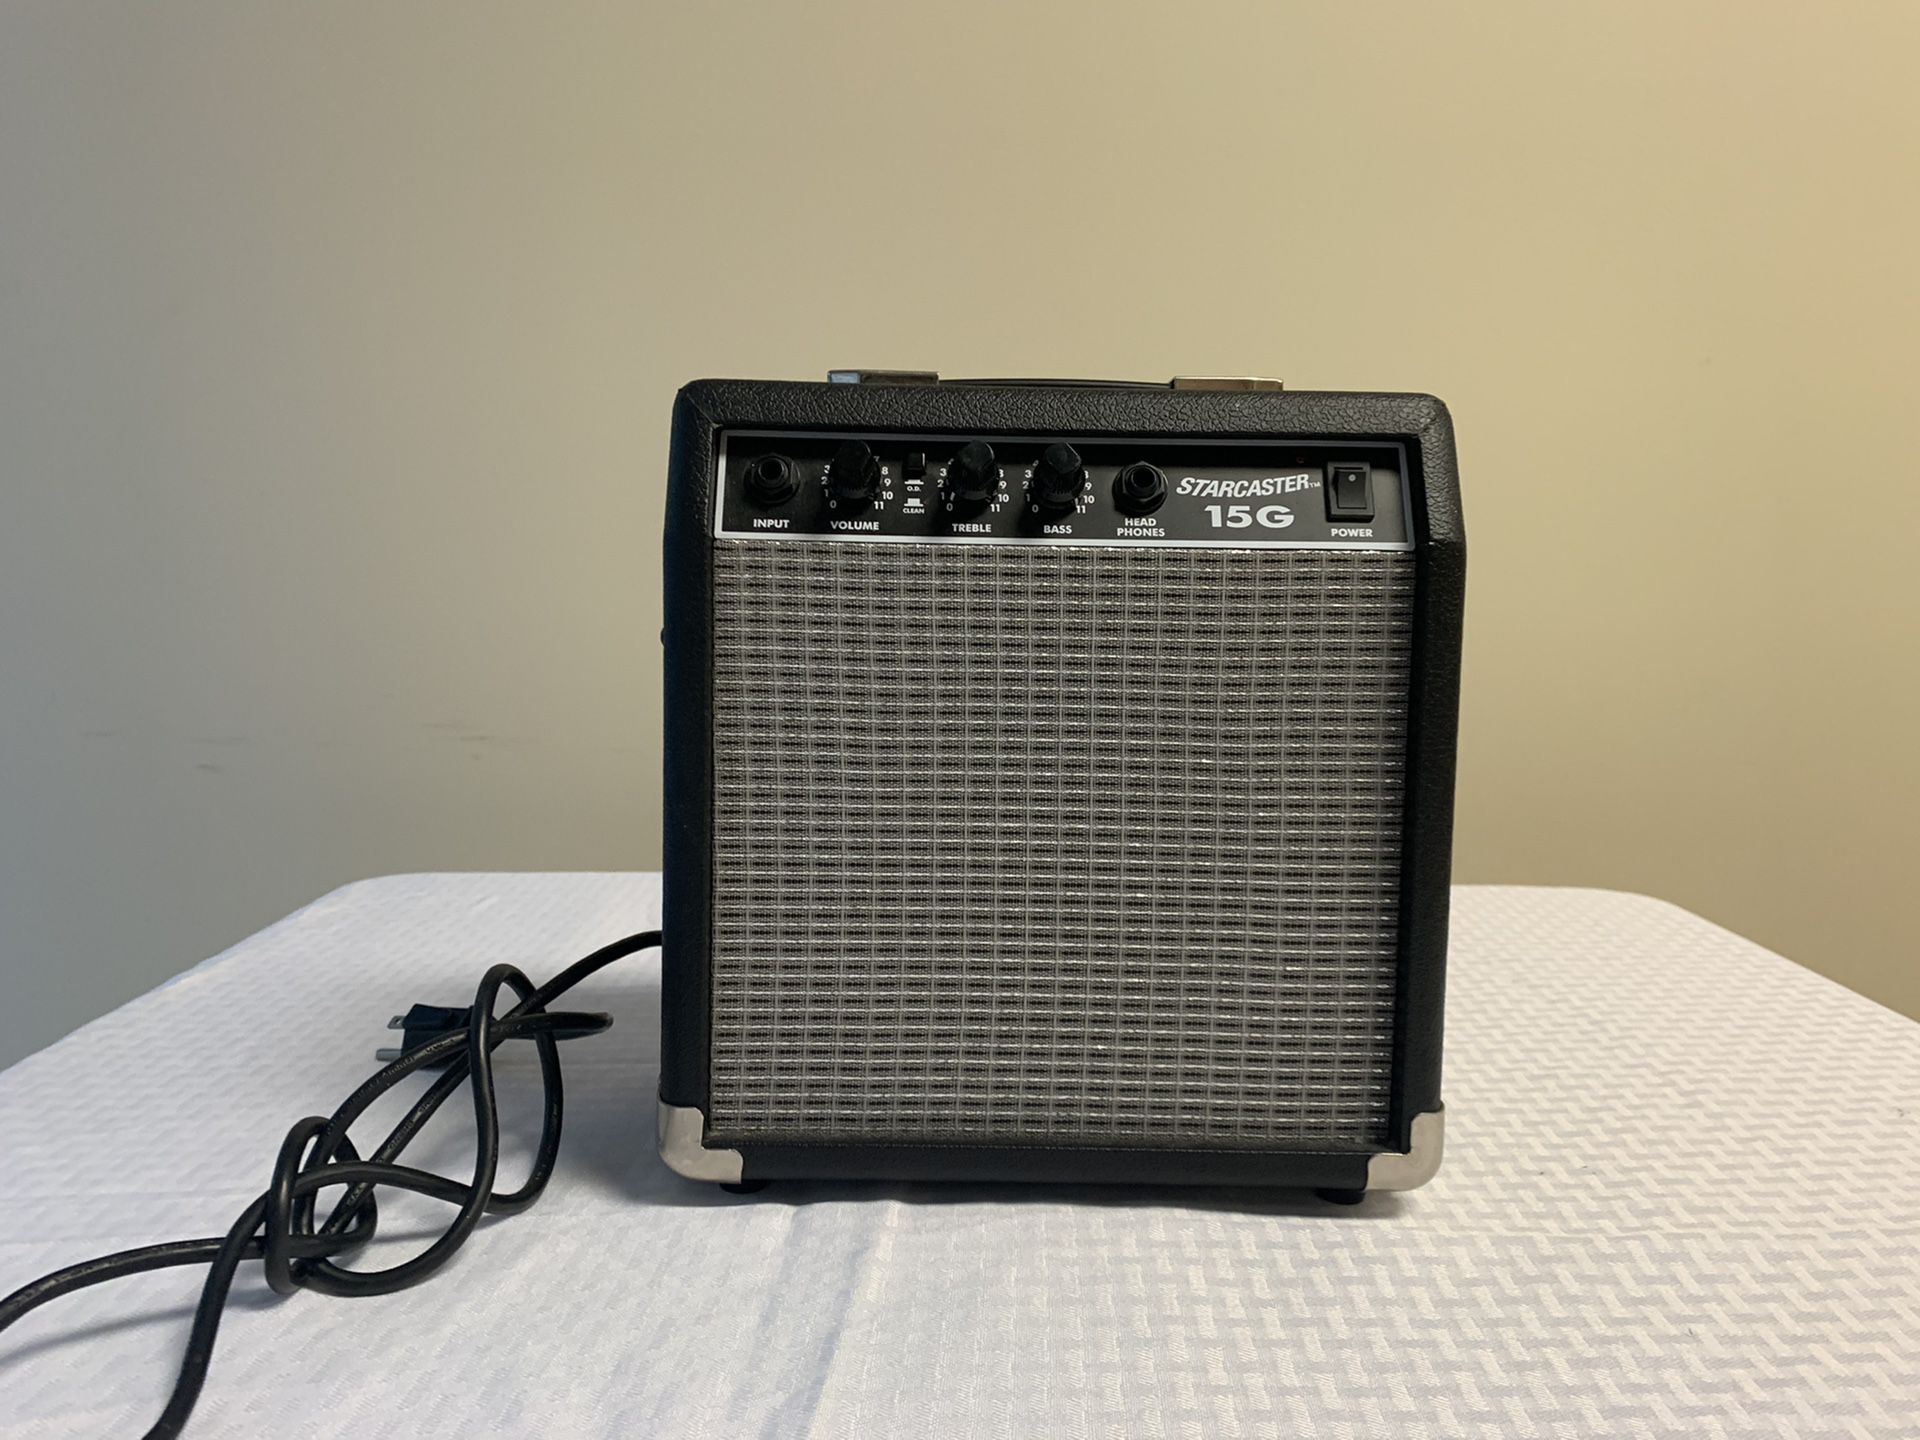 Starcaster Amplifier. Please see pics for more info.